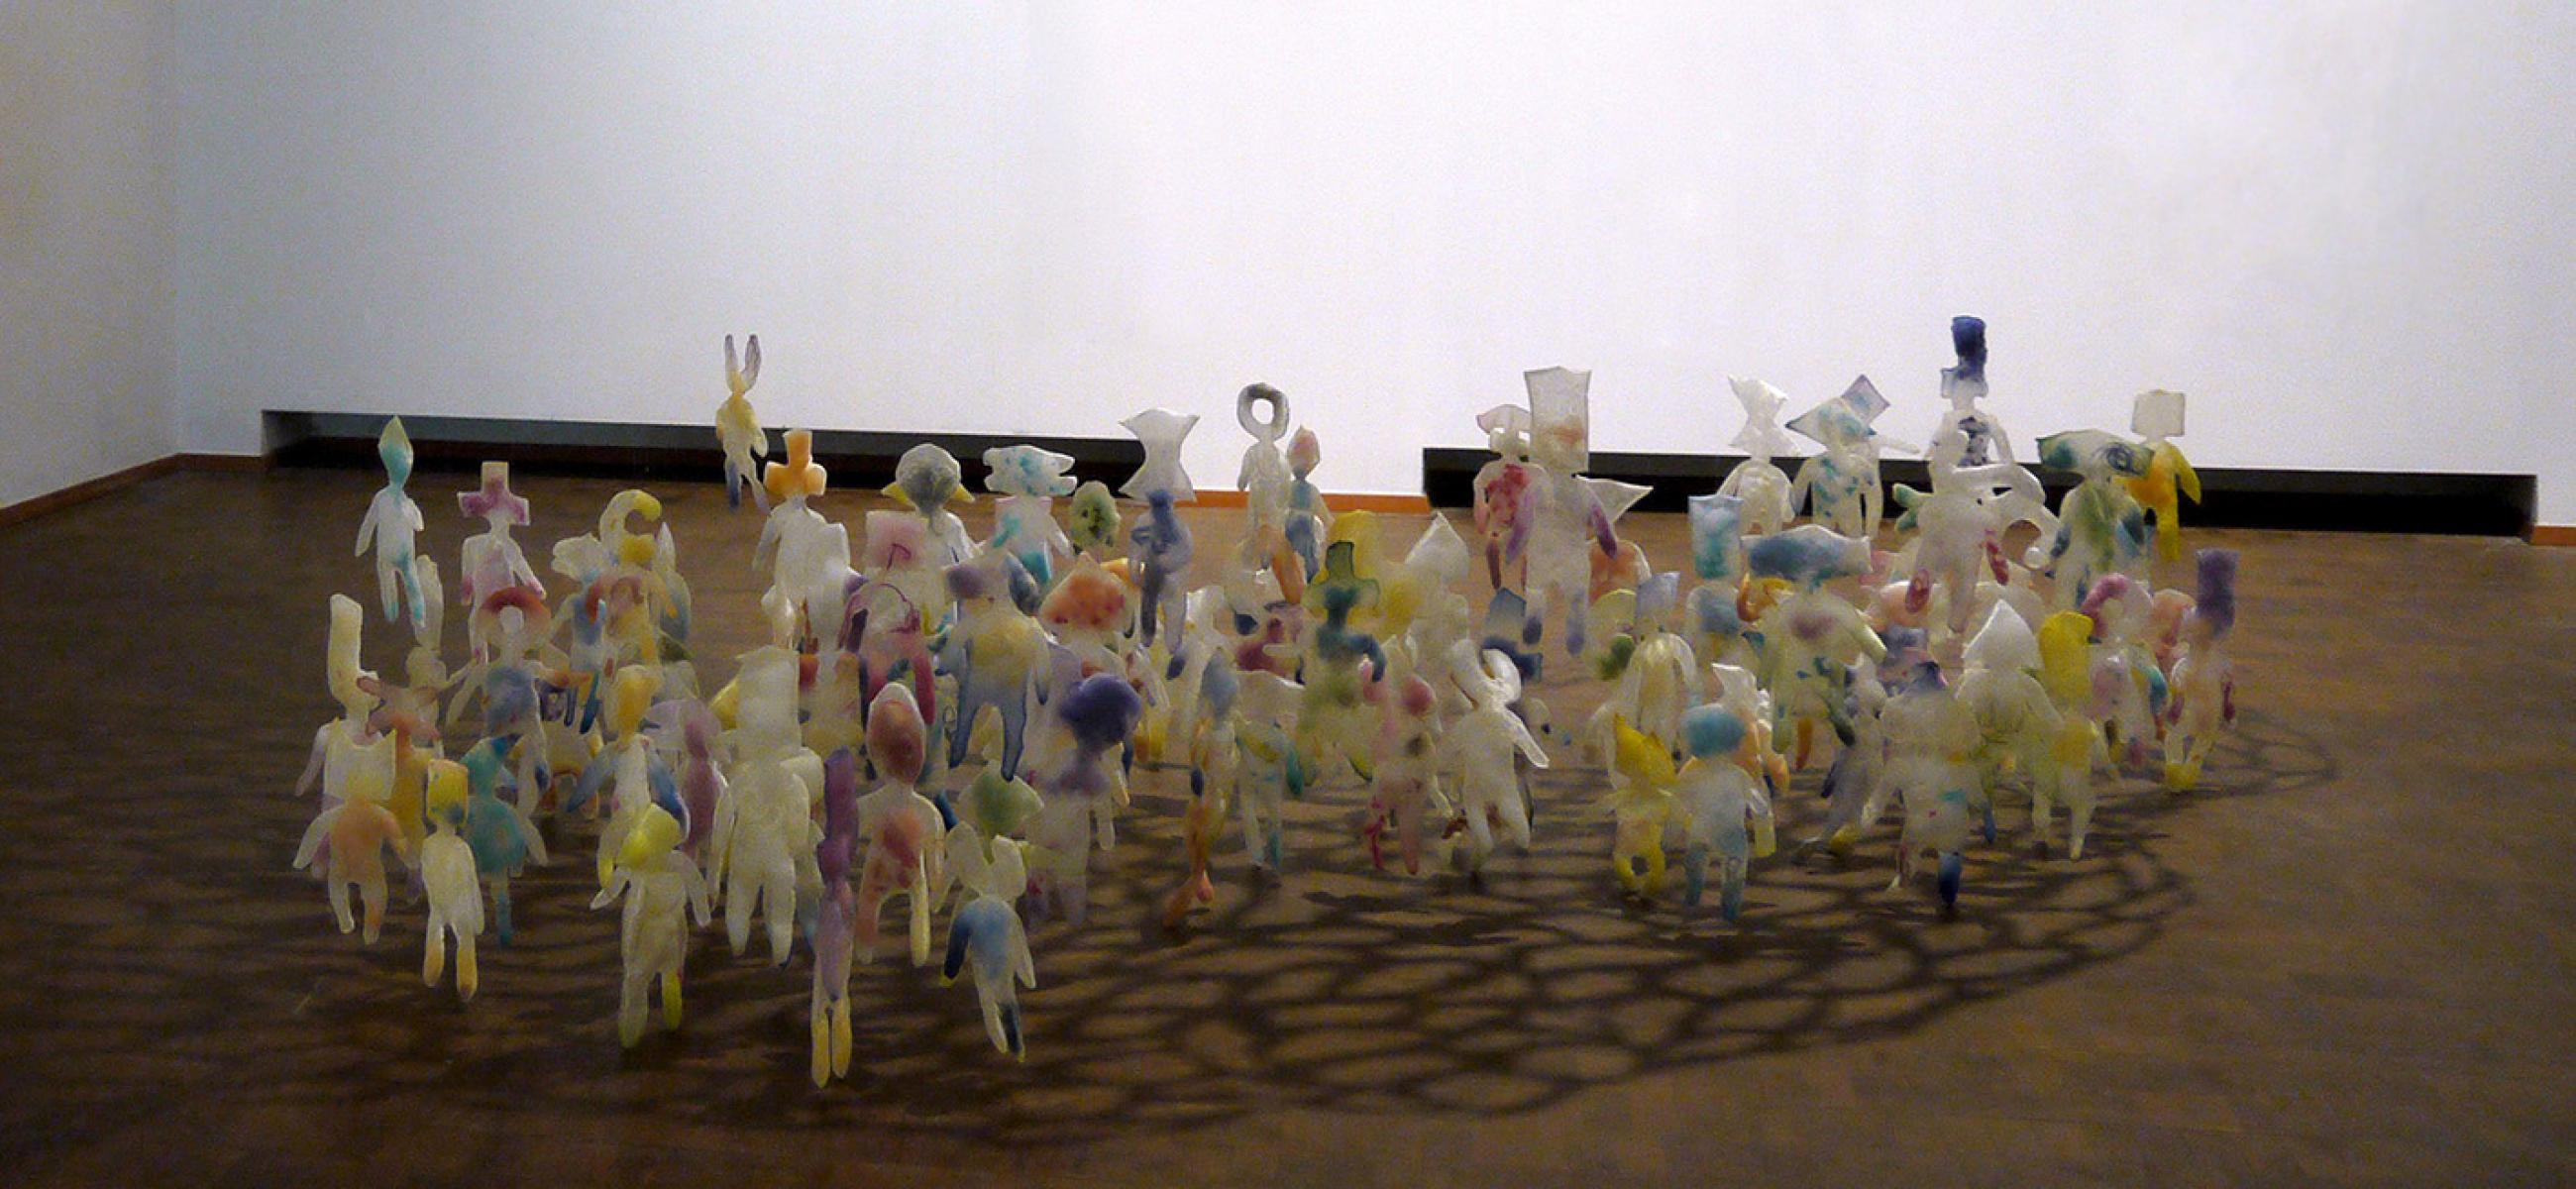 humanoid figures grouped below a floating net